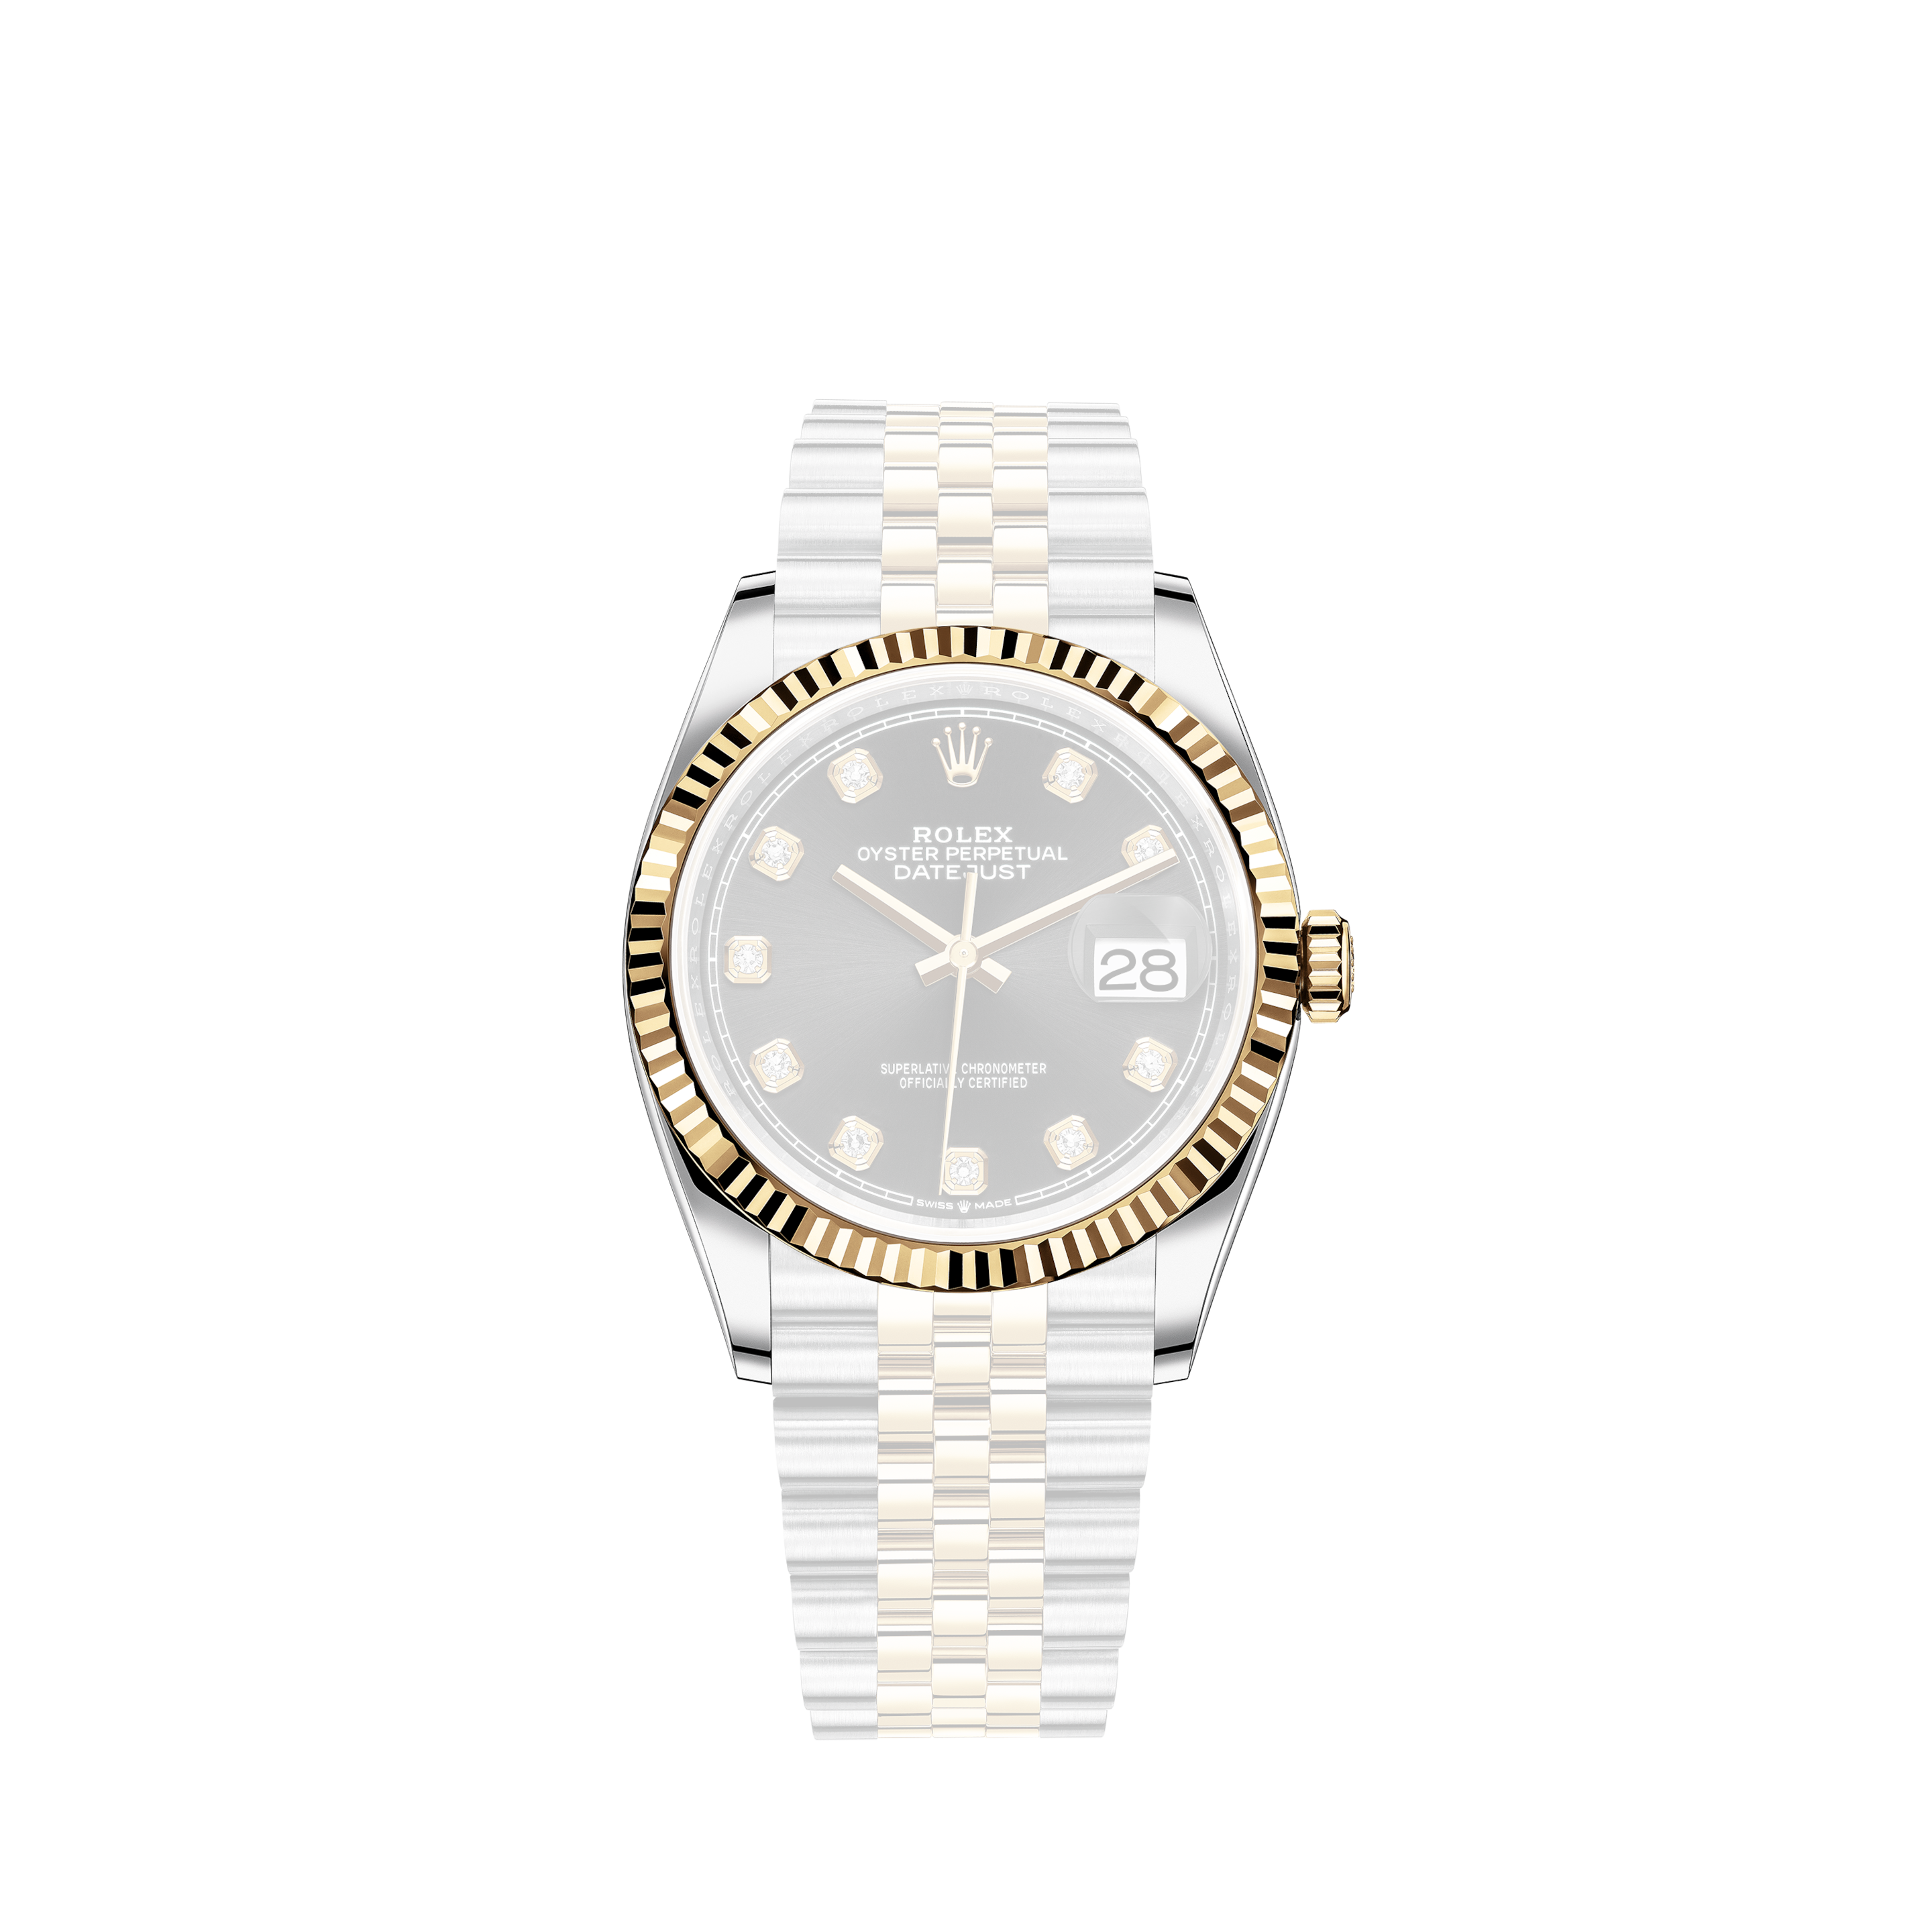 Rolex New Style Datejust Rose Two Tone Fluted Bezel & Champagne Diamond Dial on Oyster Bracelet